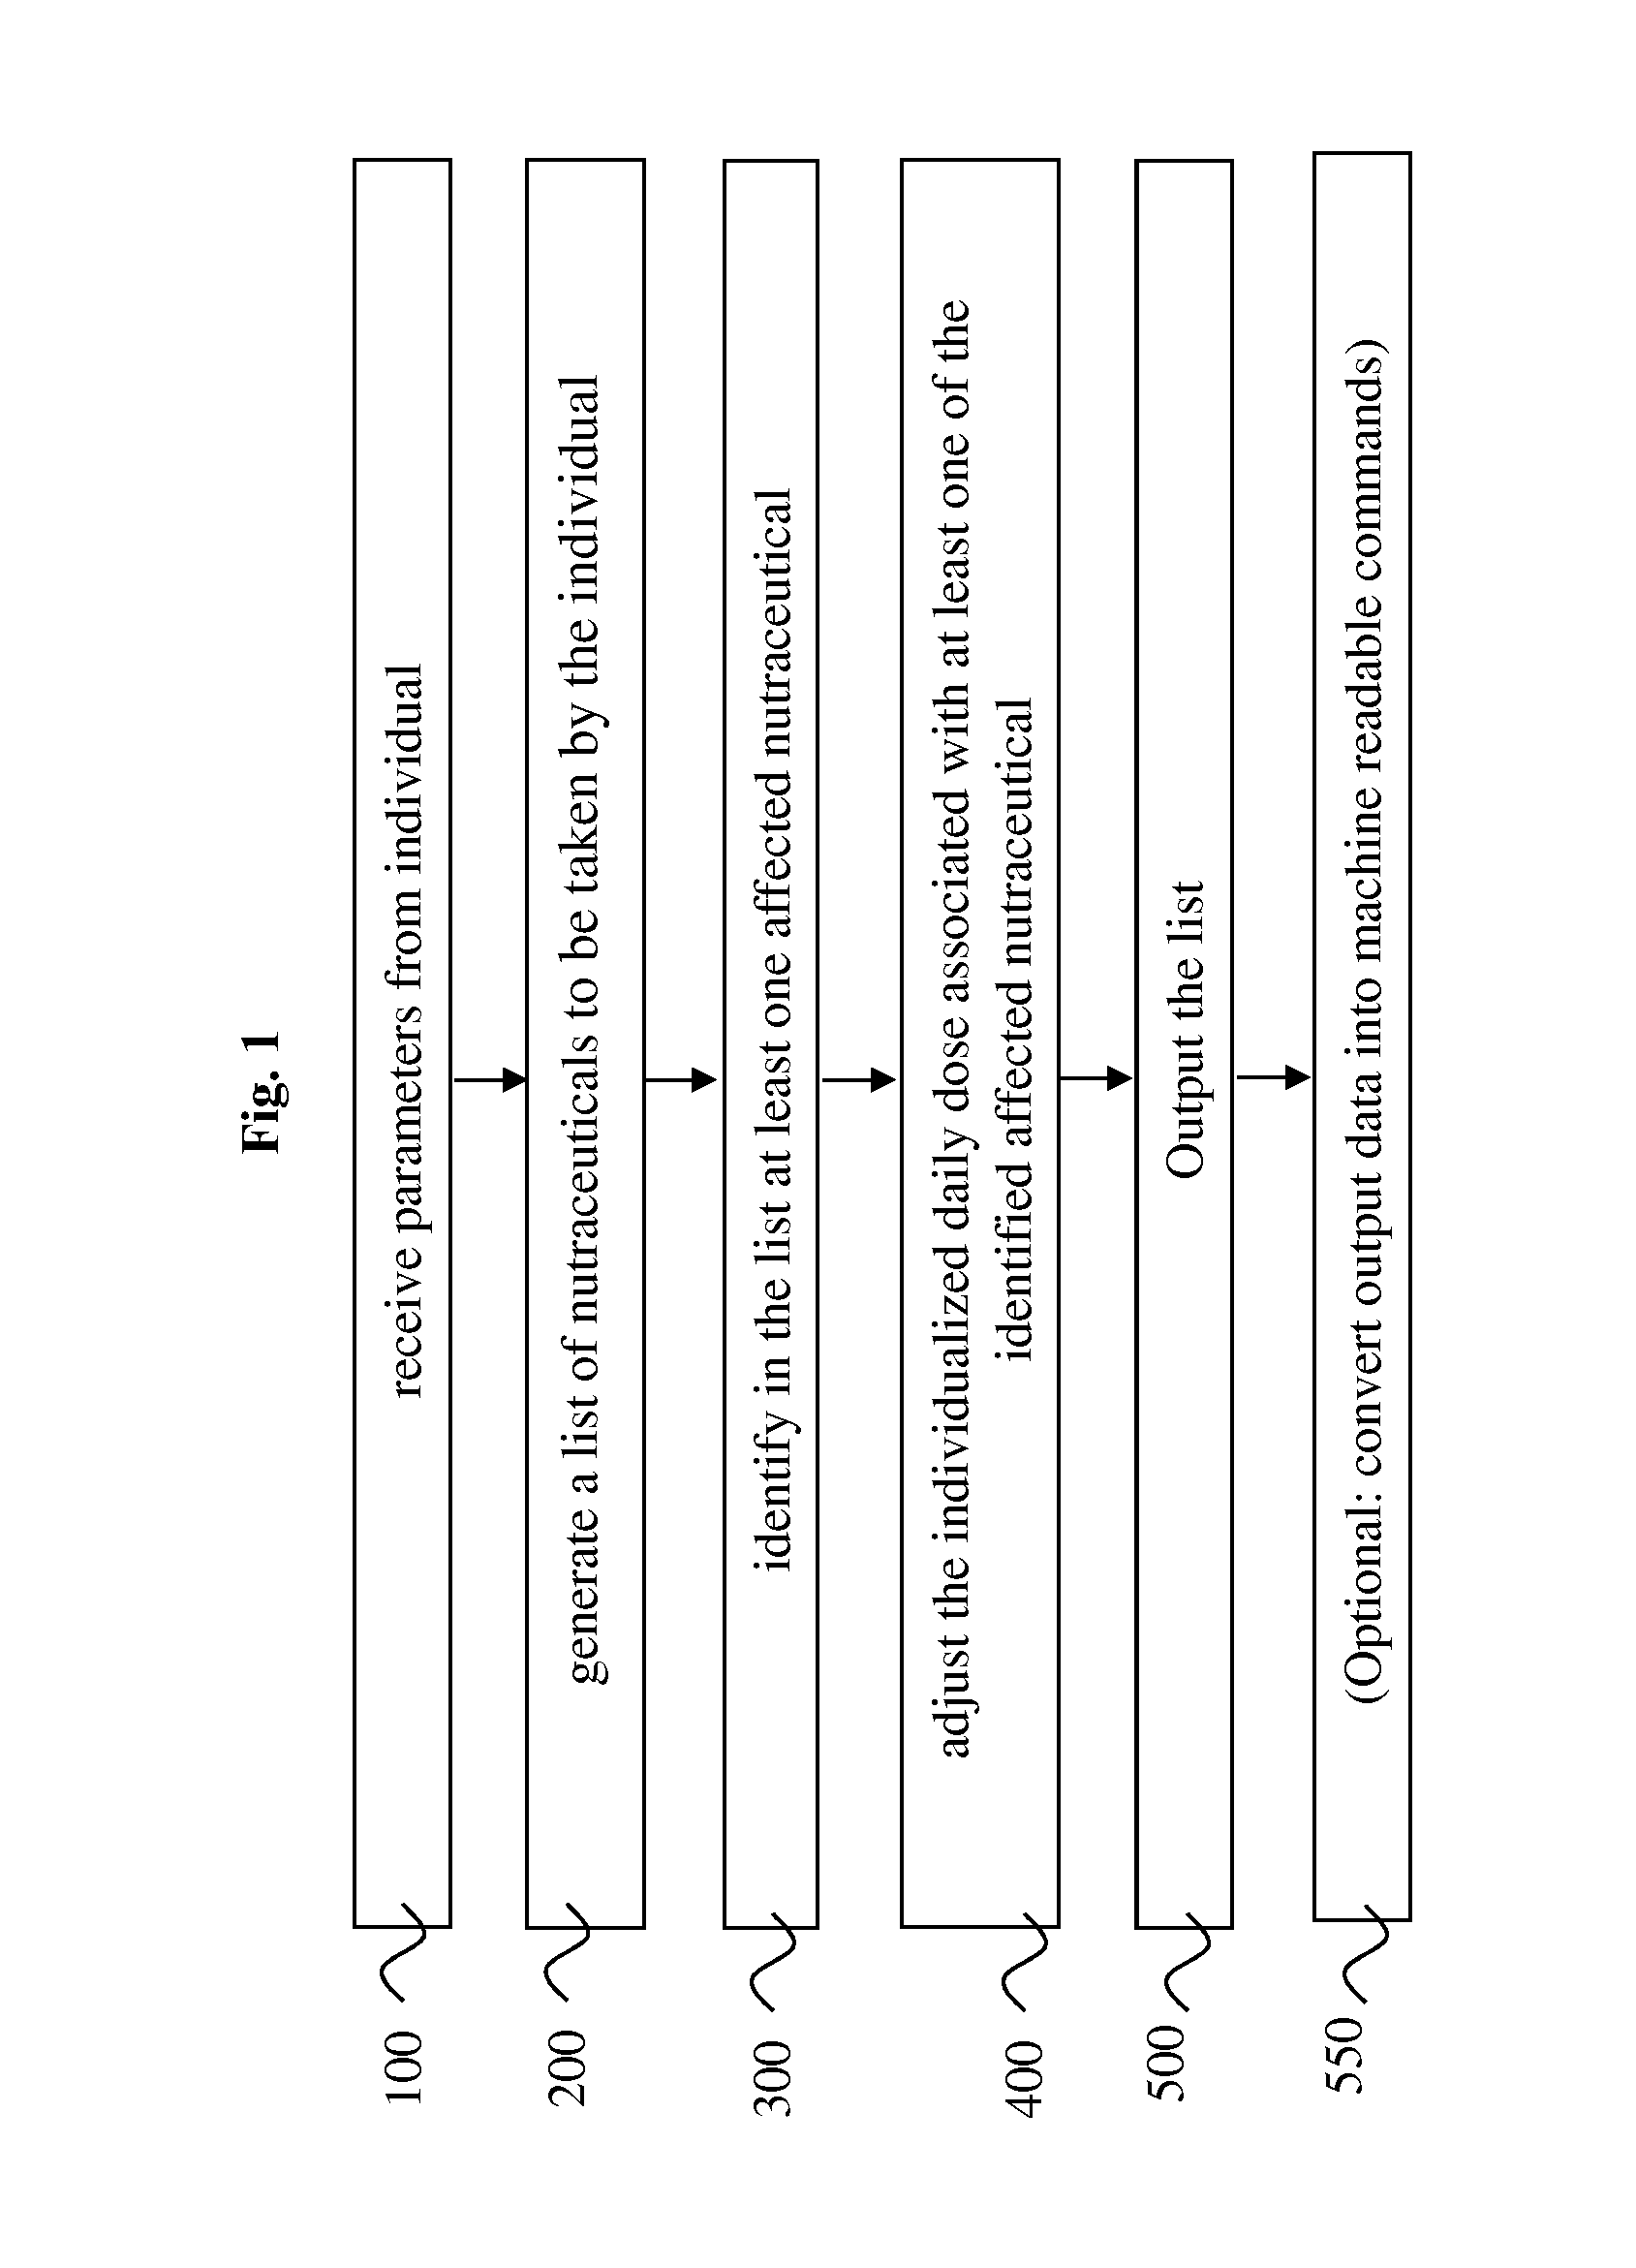 Methods for providing a personalized list of dietary nutrients and supplements